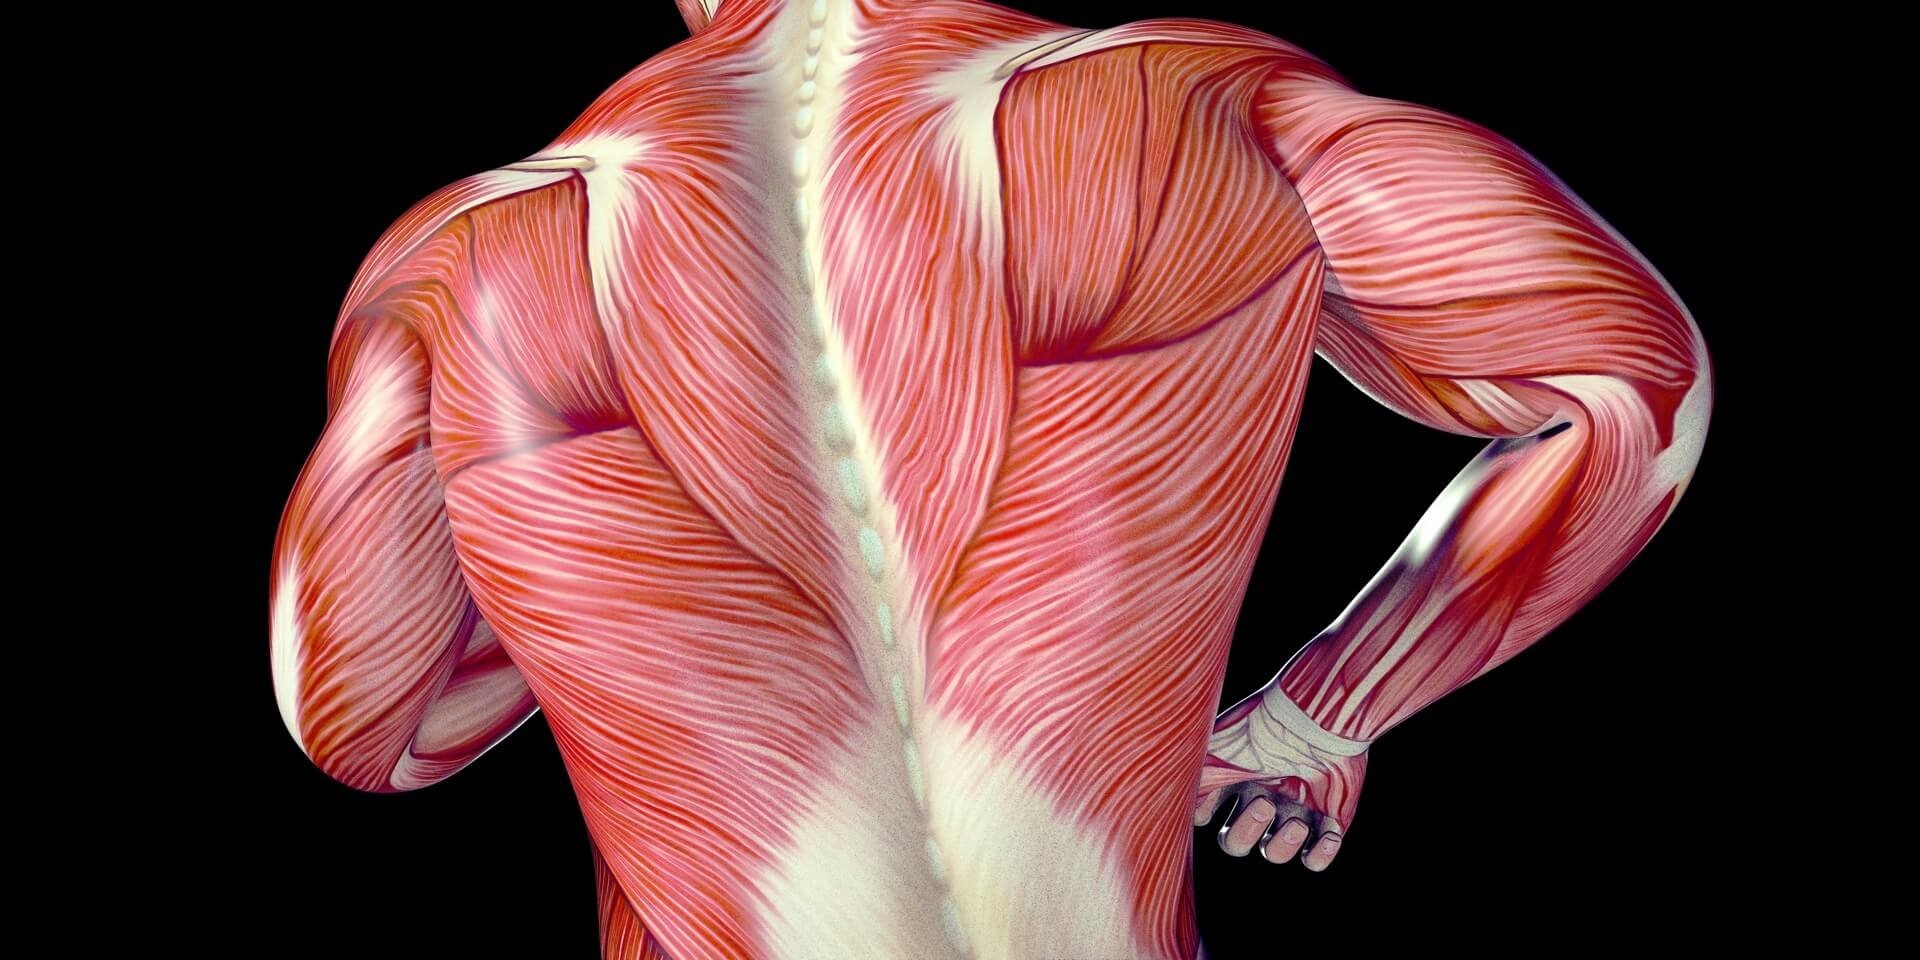 What is the fascia in your body?